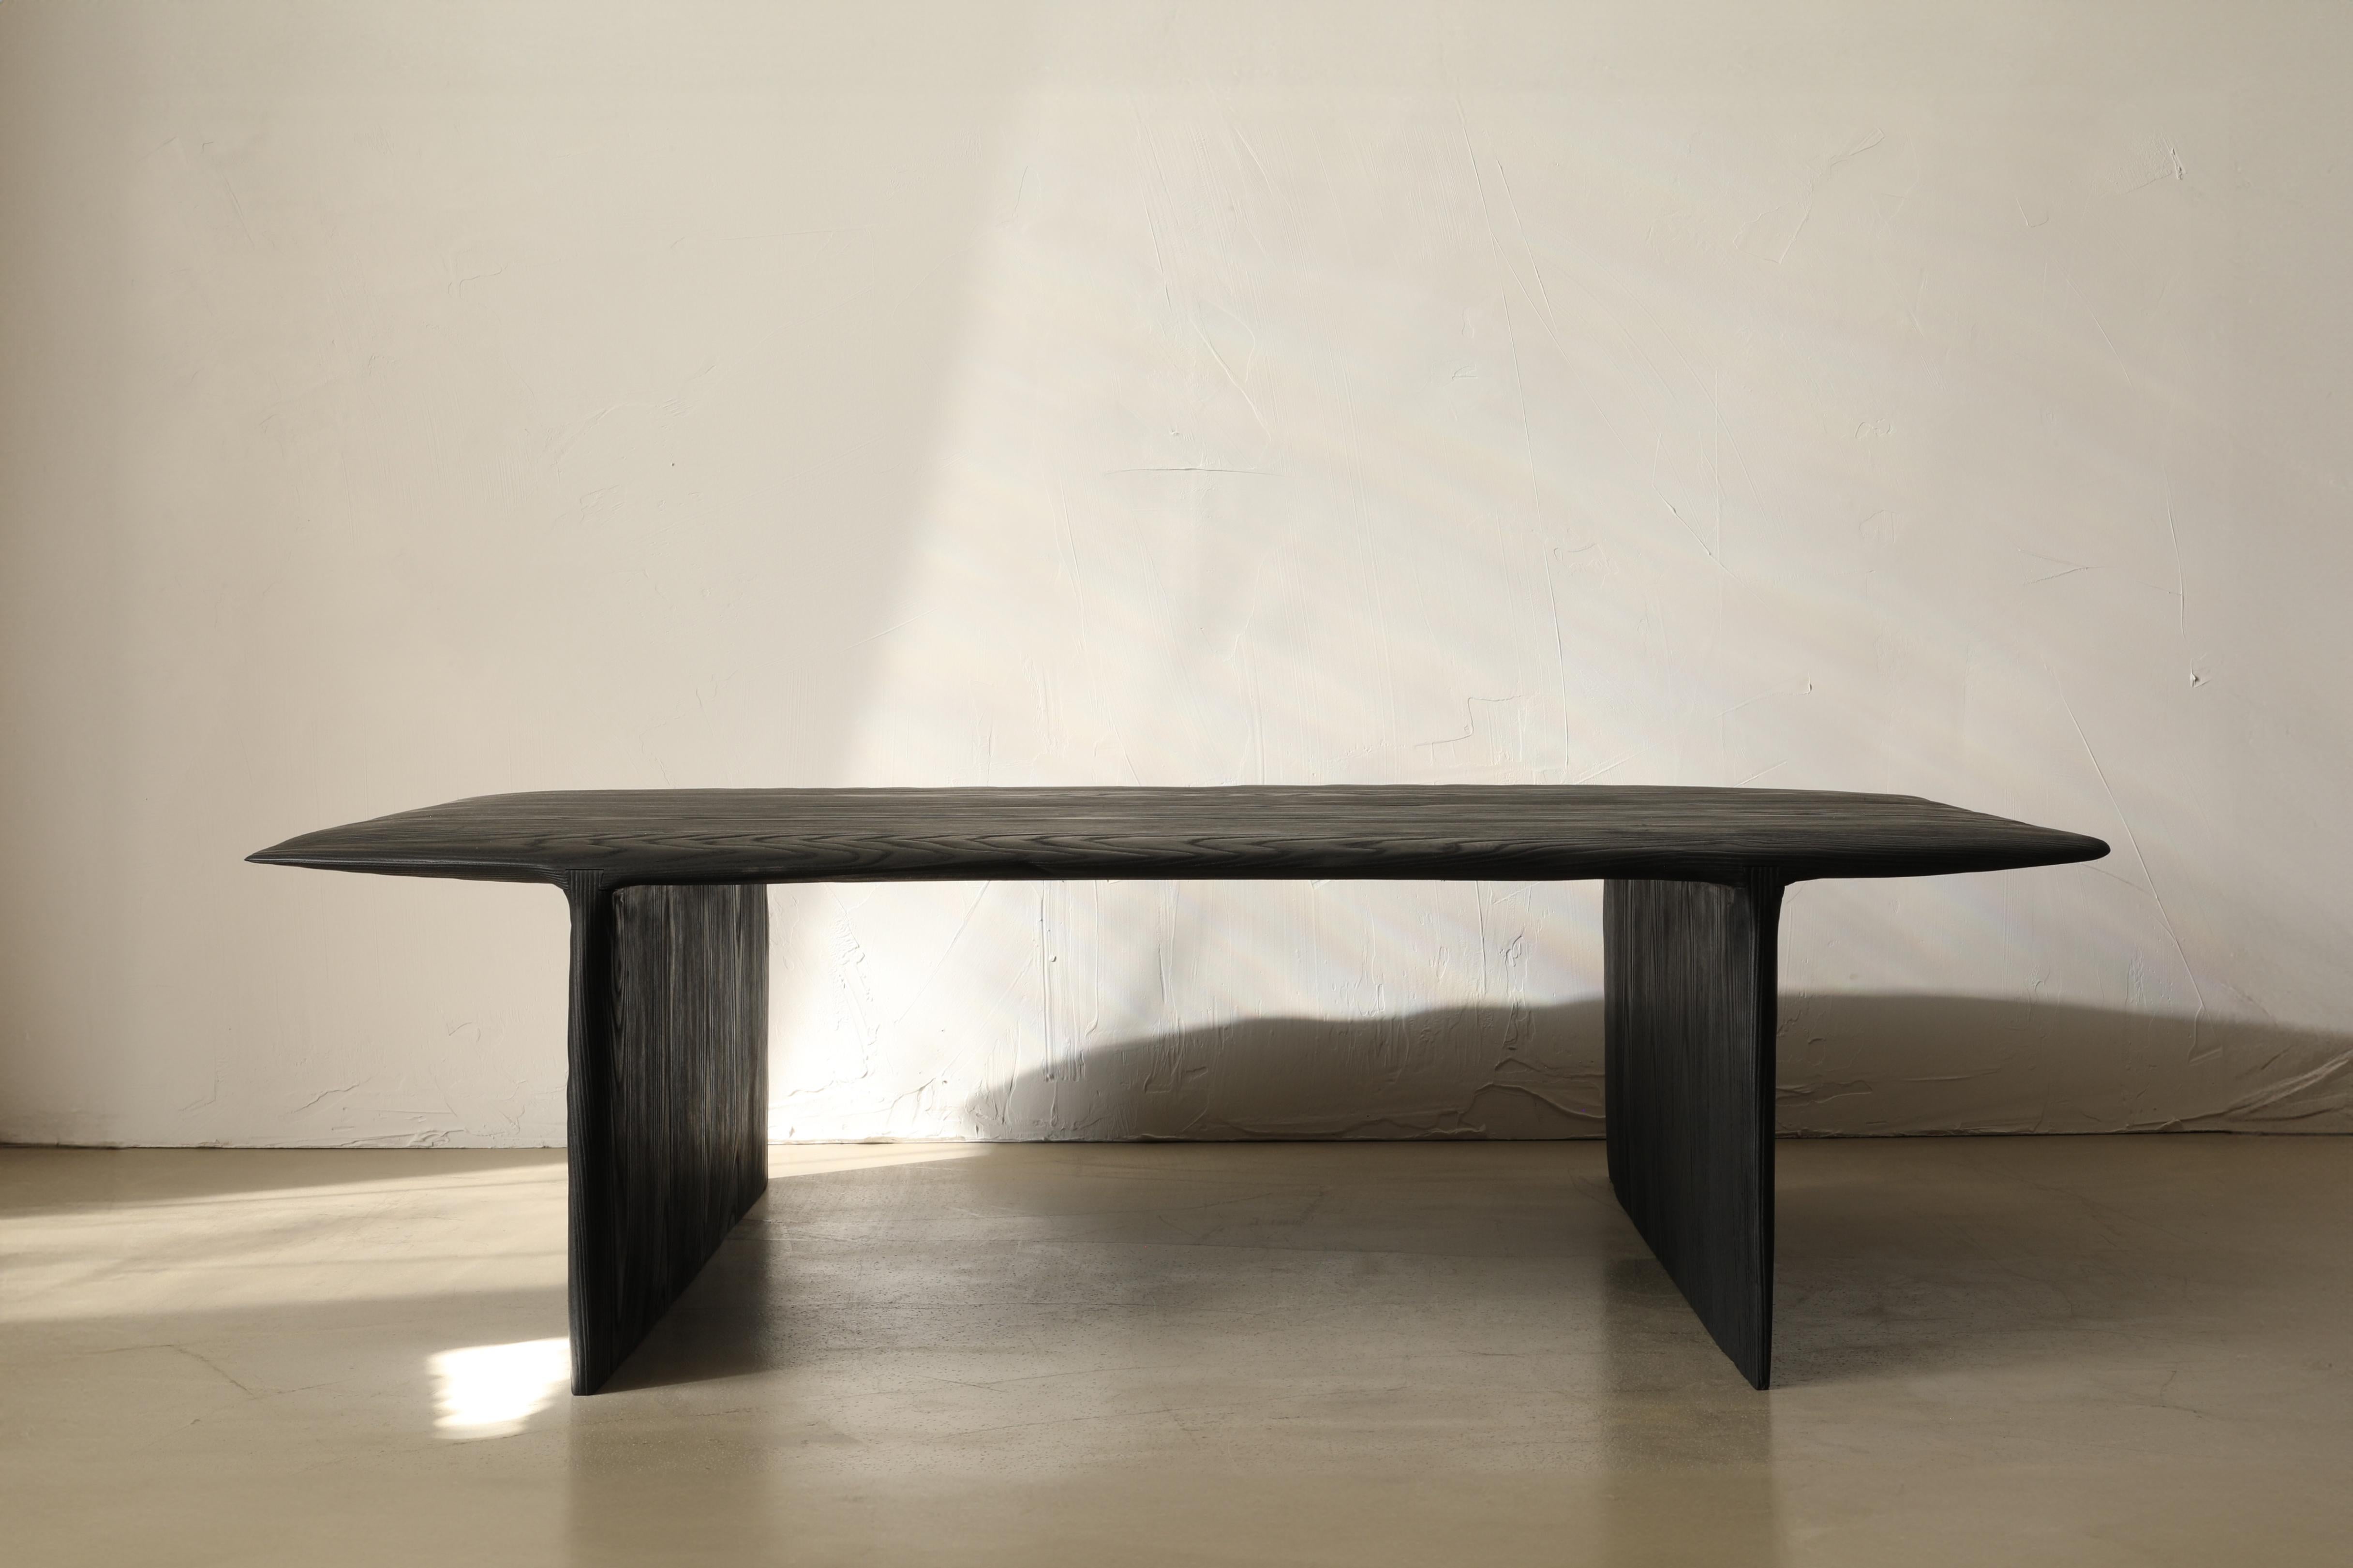 The Figures Coffee Table is a low 48”x30” table. The default top and base are burnt ash but can be optioned out at additional cost.

FIGURES - This collection can be easily identified by its visually simple profile and its deeply textured surfaces.